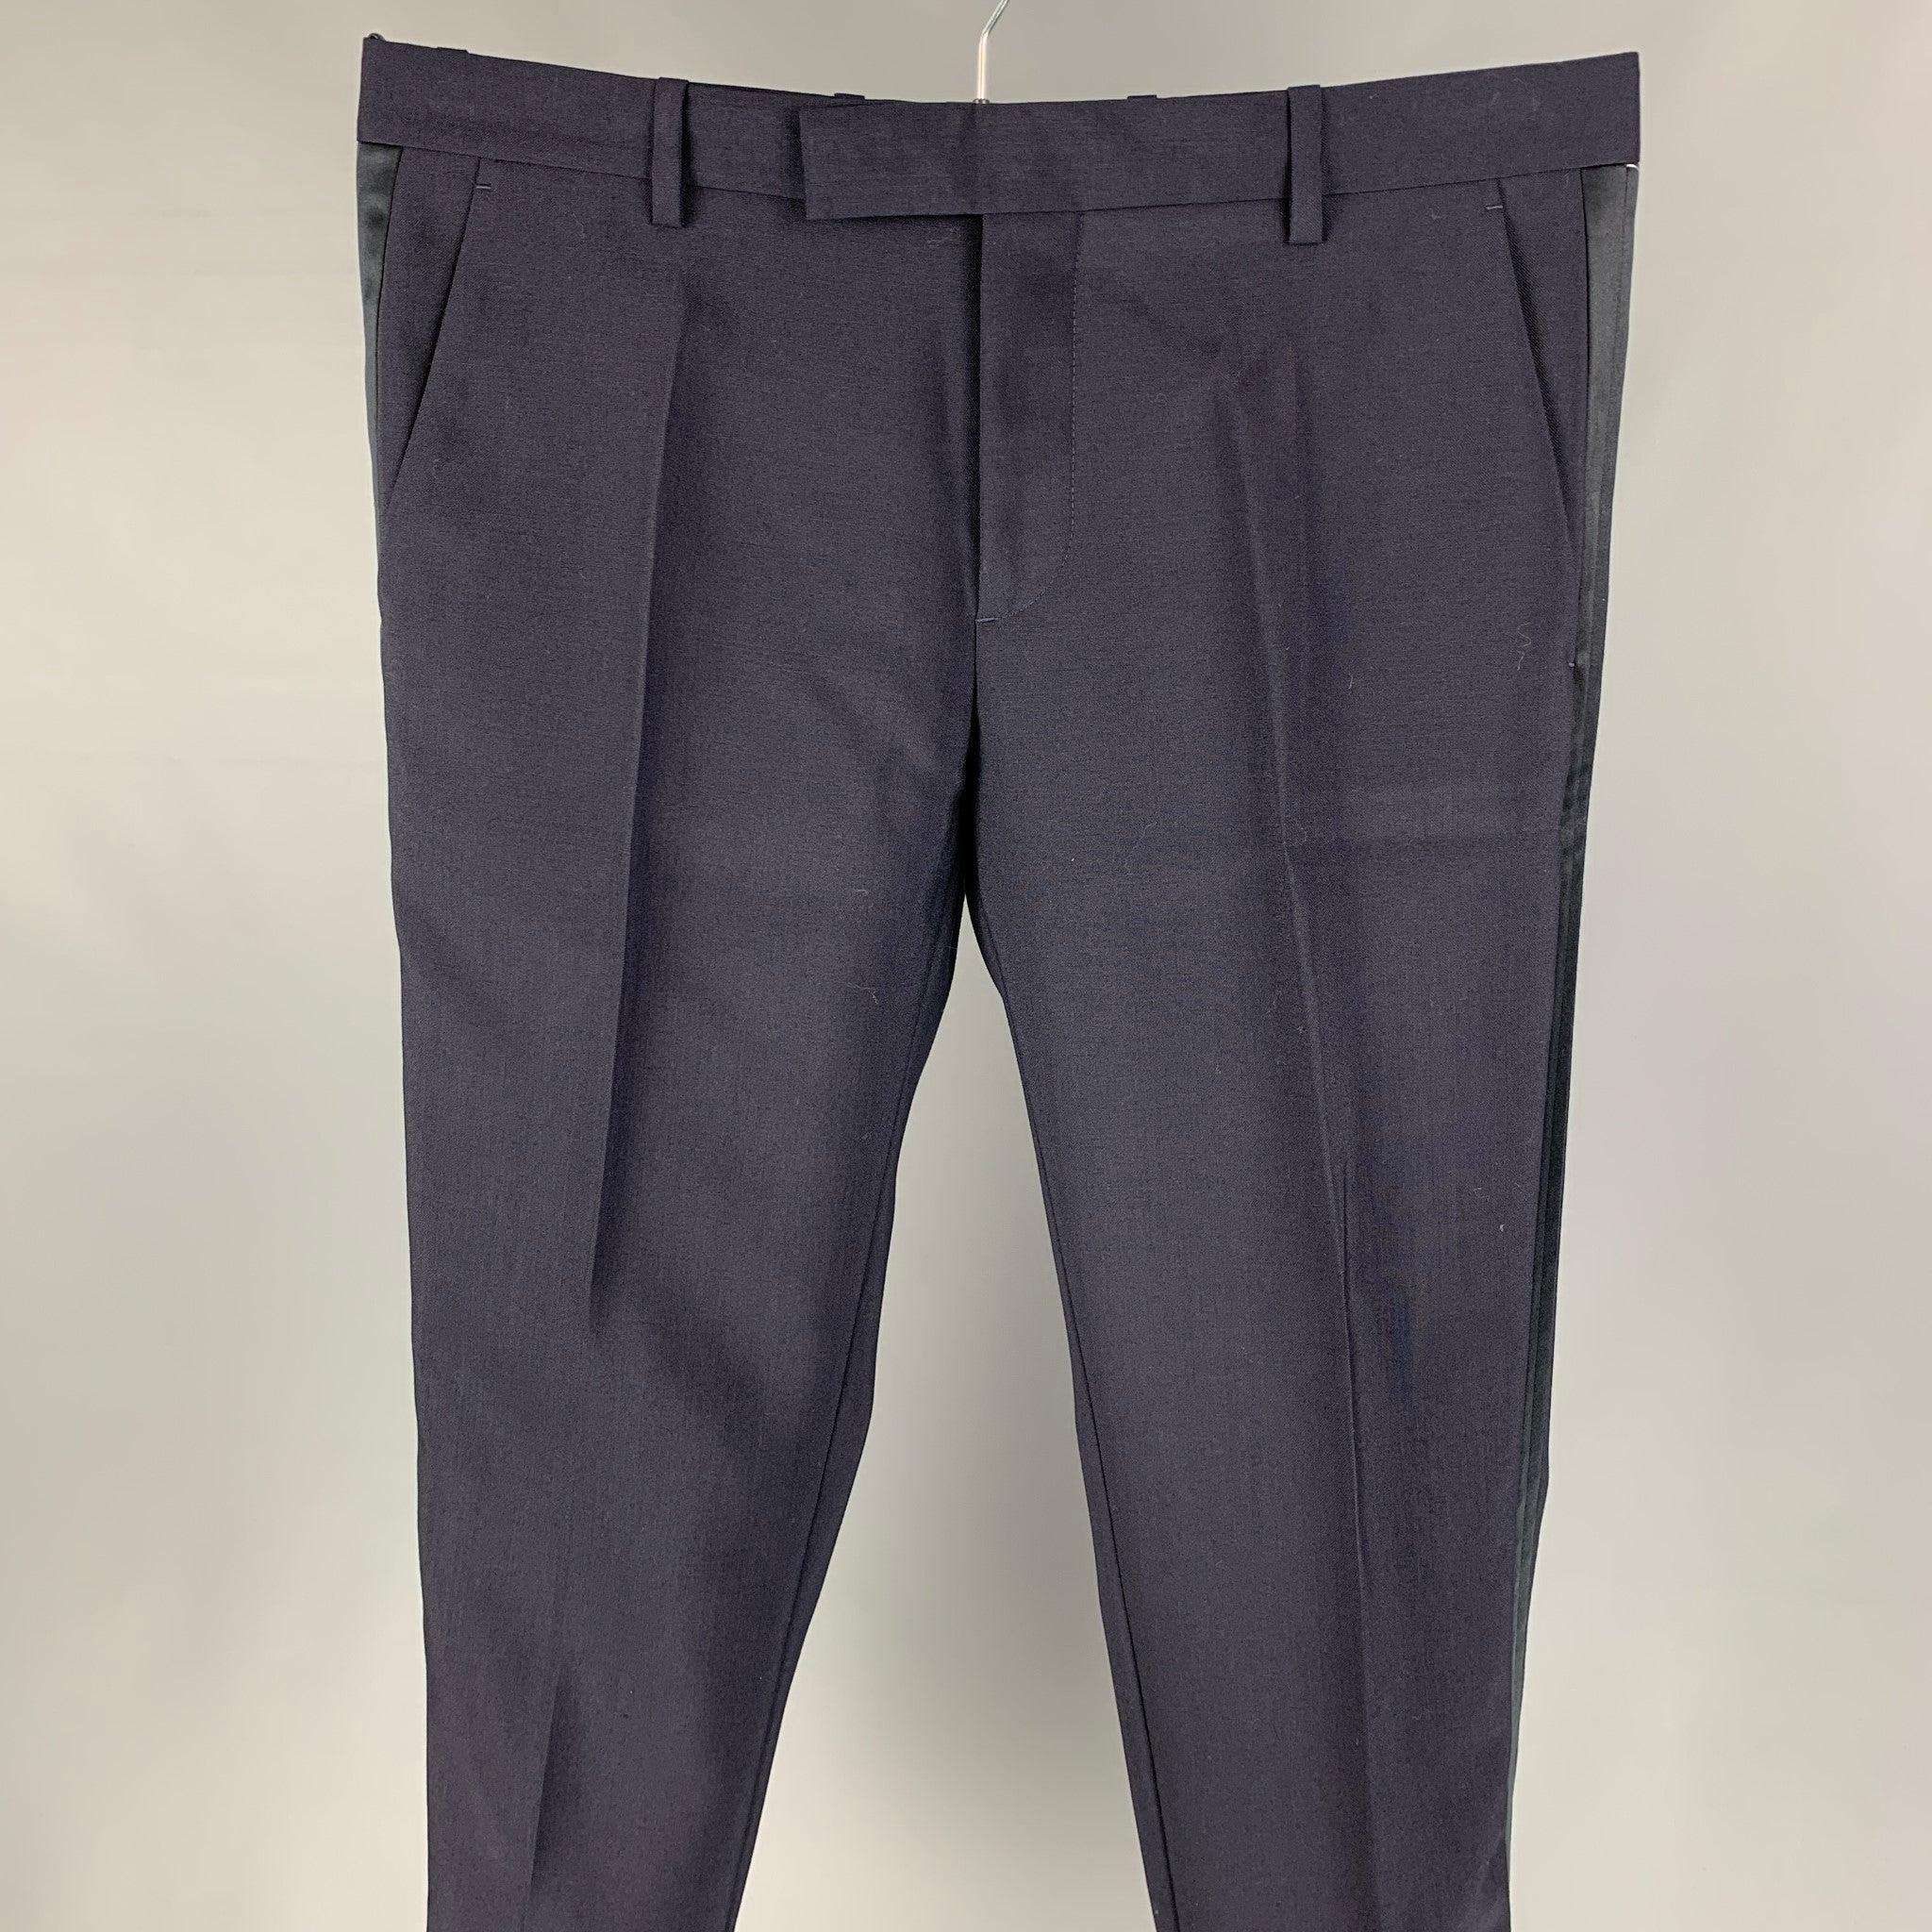 VIKTOR & ROLF tuxedo dress pants comes in a navy & black mohair featuring a slim fit, front tab, and a zip ly closure. Made in Italy.
Excellent
Pre-Owned Condition. 

Marked:   50 

Measurements: 
  Waist: 34 inches  Rise: 9.5 inches  Inseam: 33